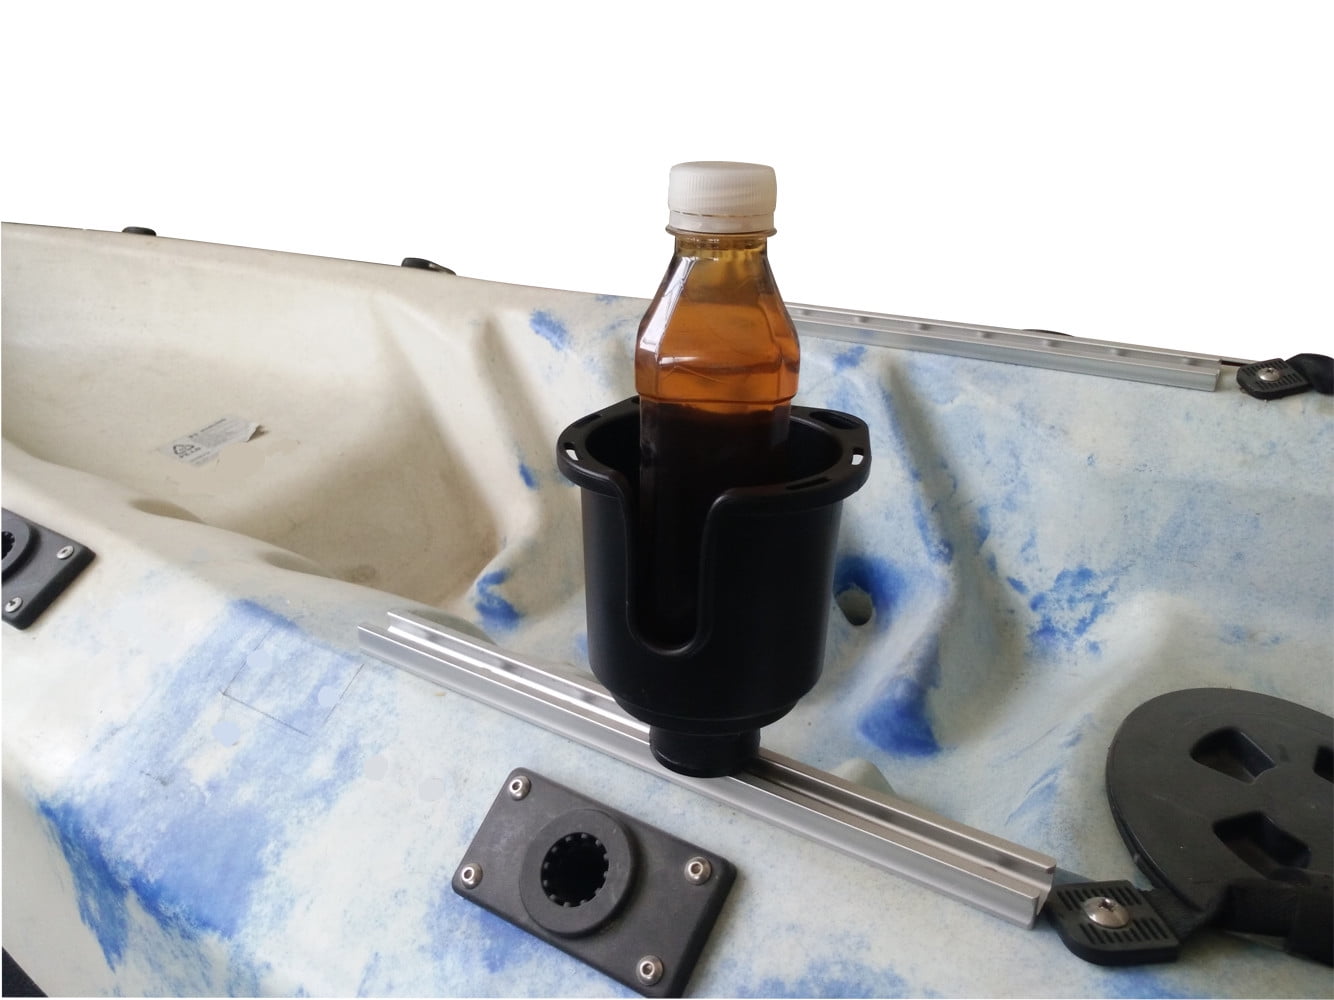 Marine Storage Box Marine Cup Holder Universal Suitable for Bass